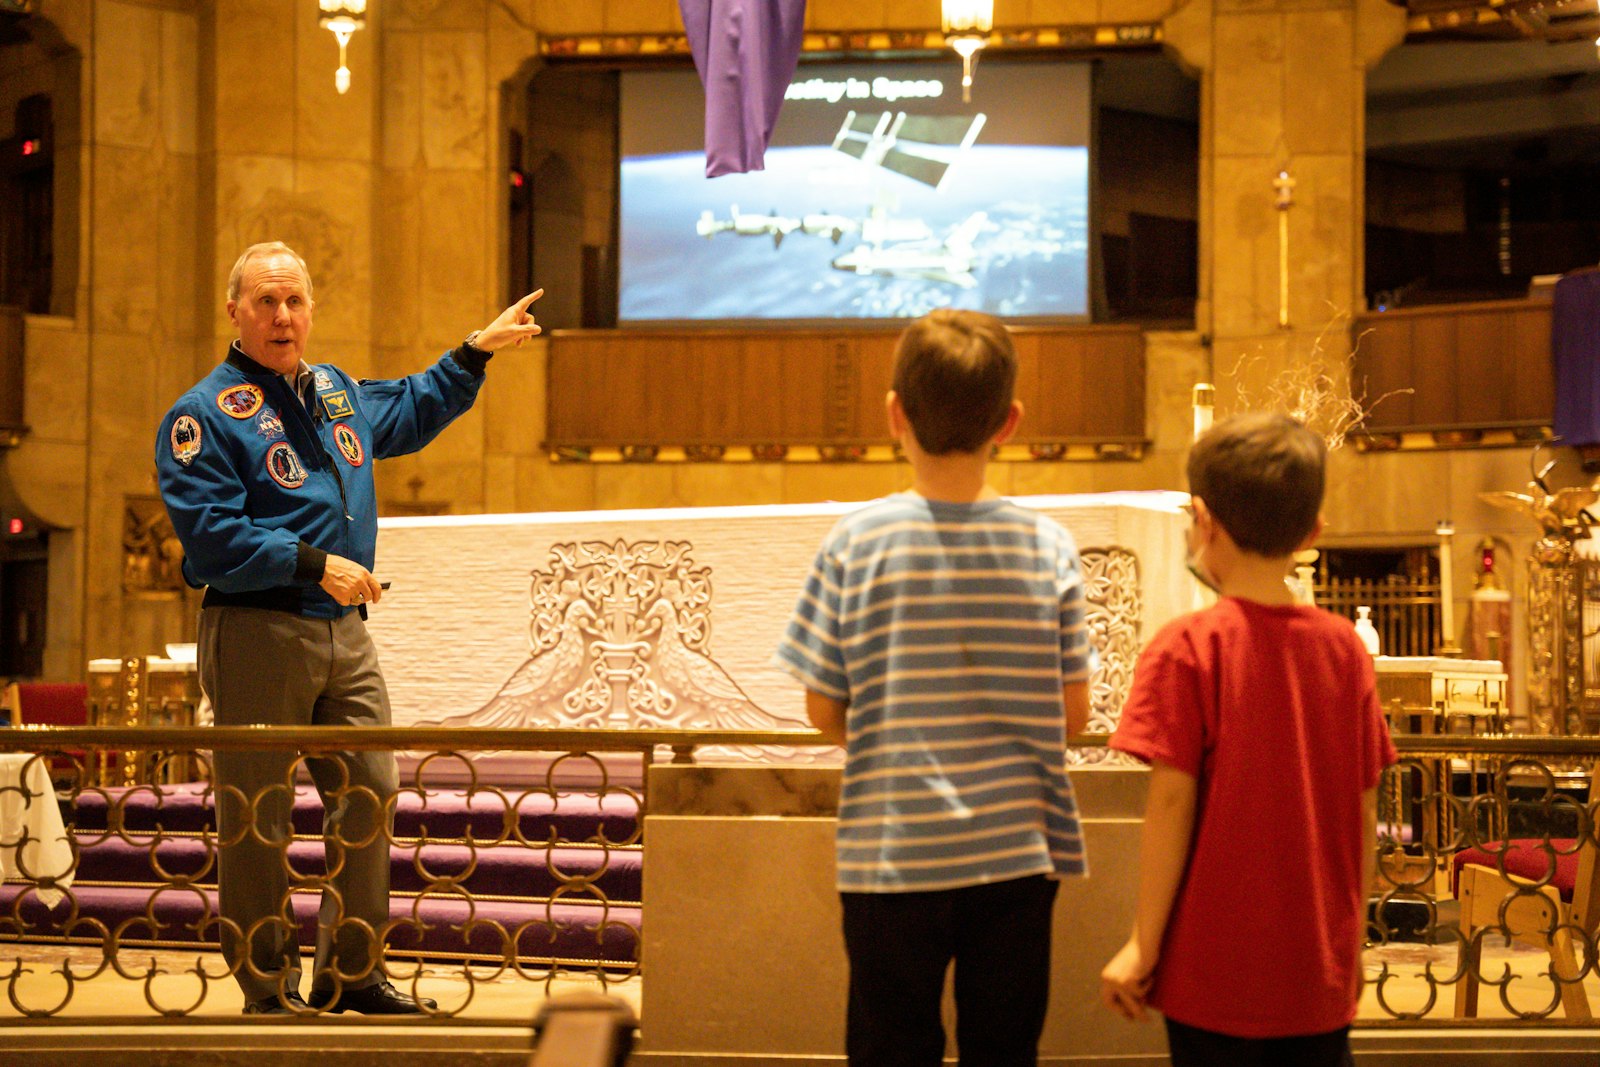 Jones explaining his role and mission aboard the International Space Station to two young boys the “Live at the Basilica” speaker series April 6. Jones was inspired as a boy watching the Apollo 16 mission.